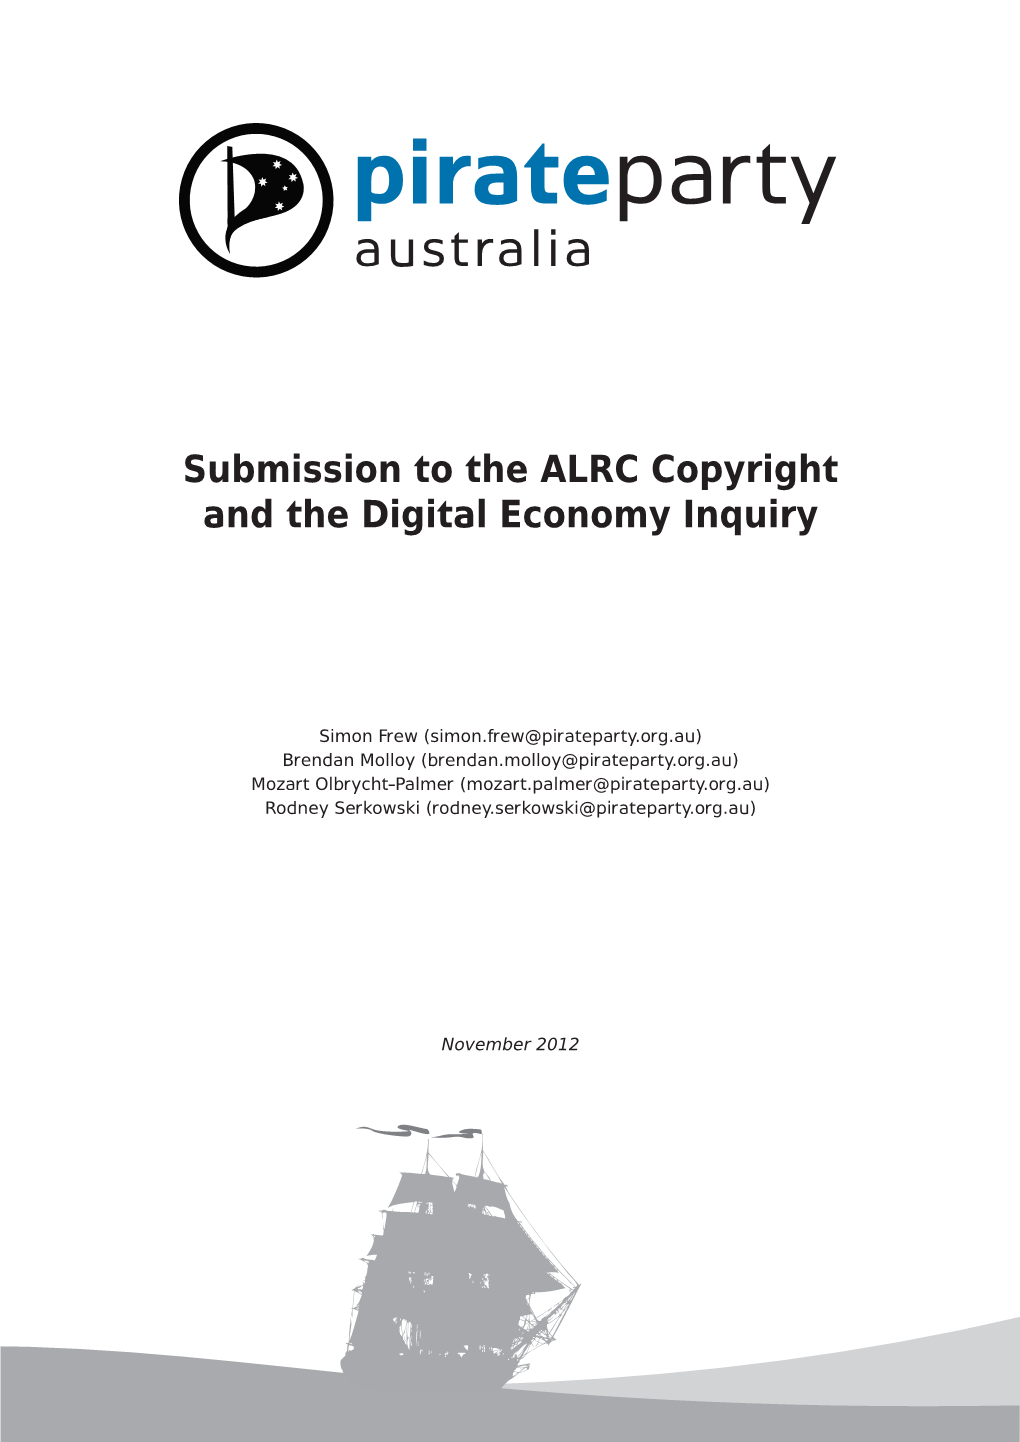 Submission to the ALRC Copyright and the Digital Economy Inquiry